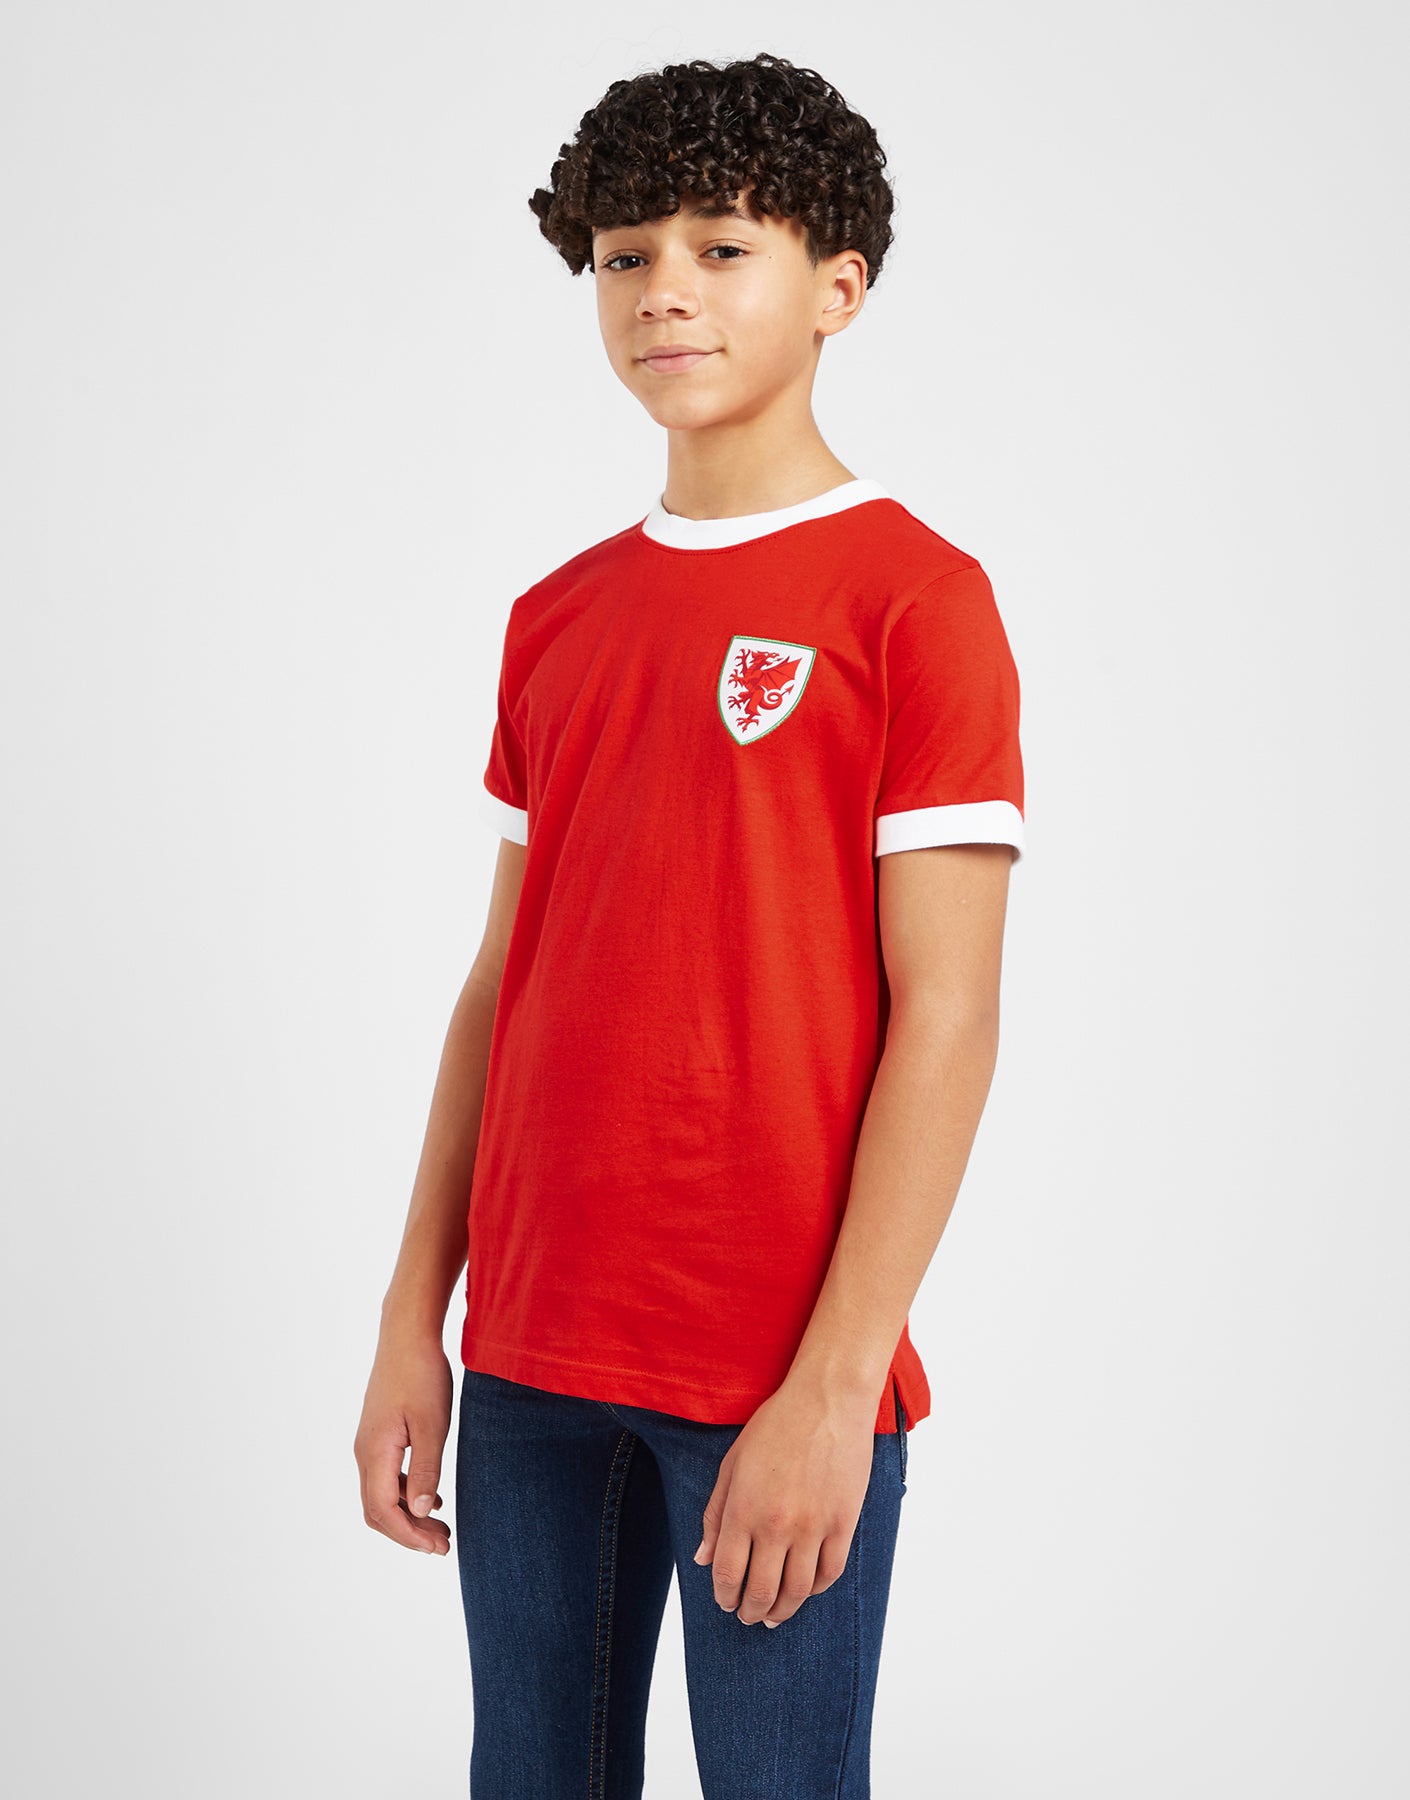 Official Team Wales Kids Ringer T-Shirt - Red - The World Football Store